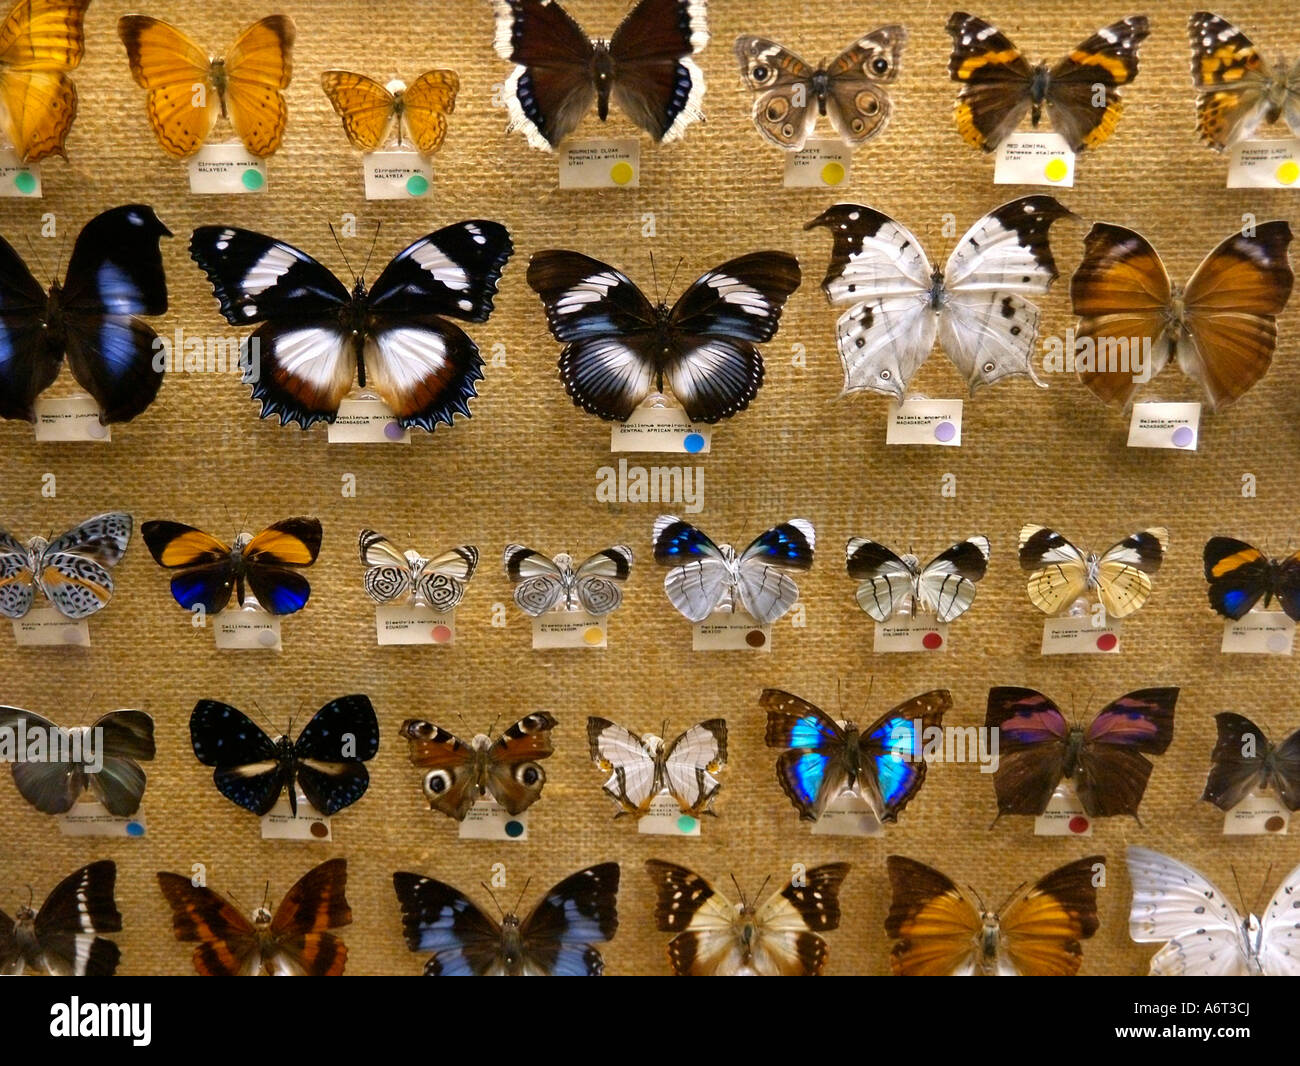 Rows of preserved, brilliantly colored butterflies mounted in a wall display with tiny labels. Stock Photo